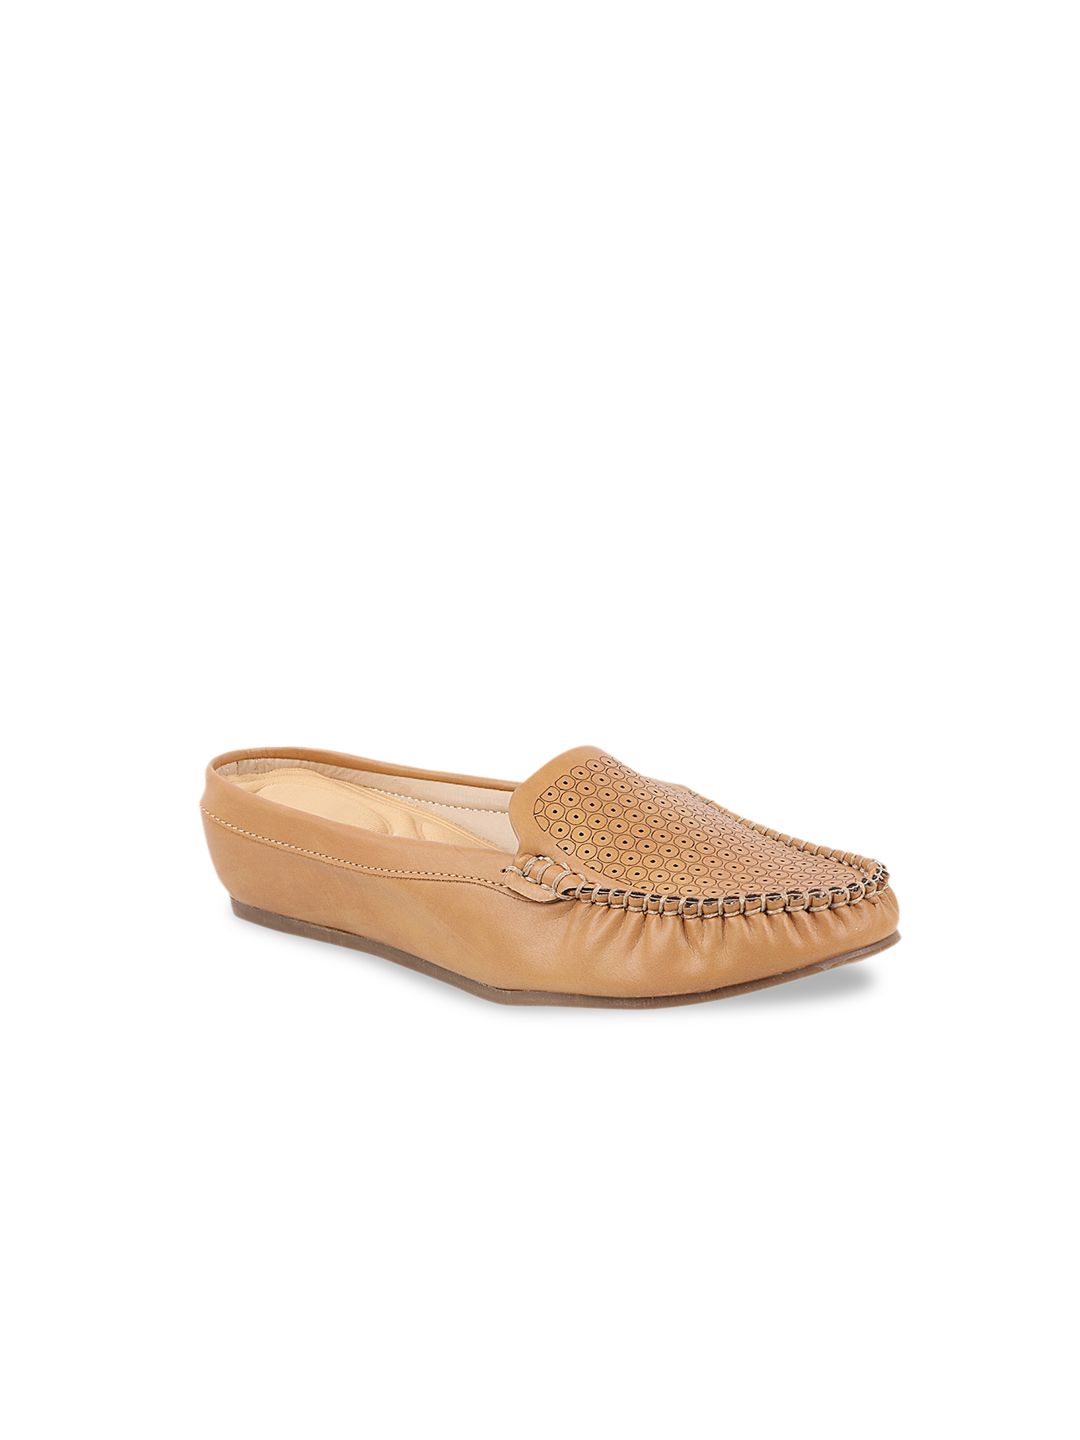 THE WHITE POLE Women Tan Textured Patent Leather Loafers Price in India